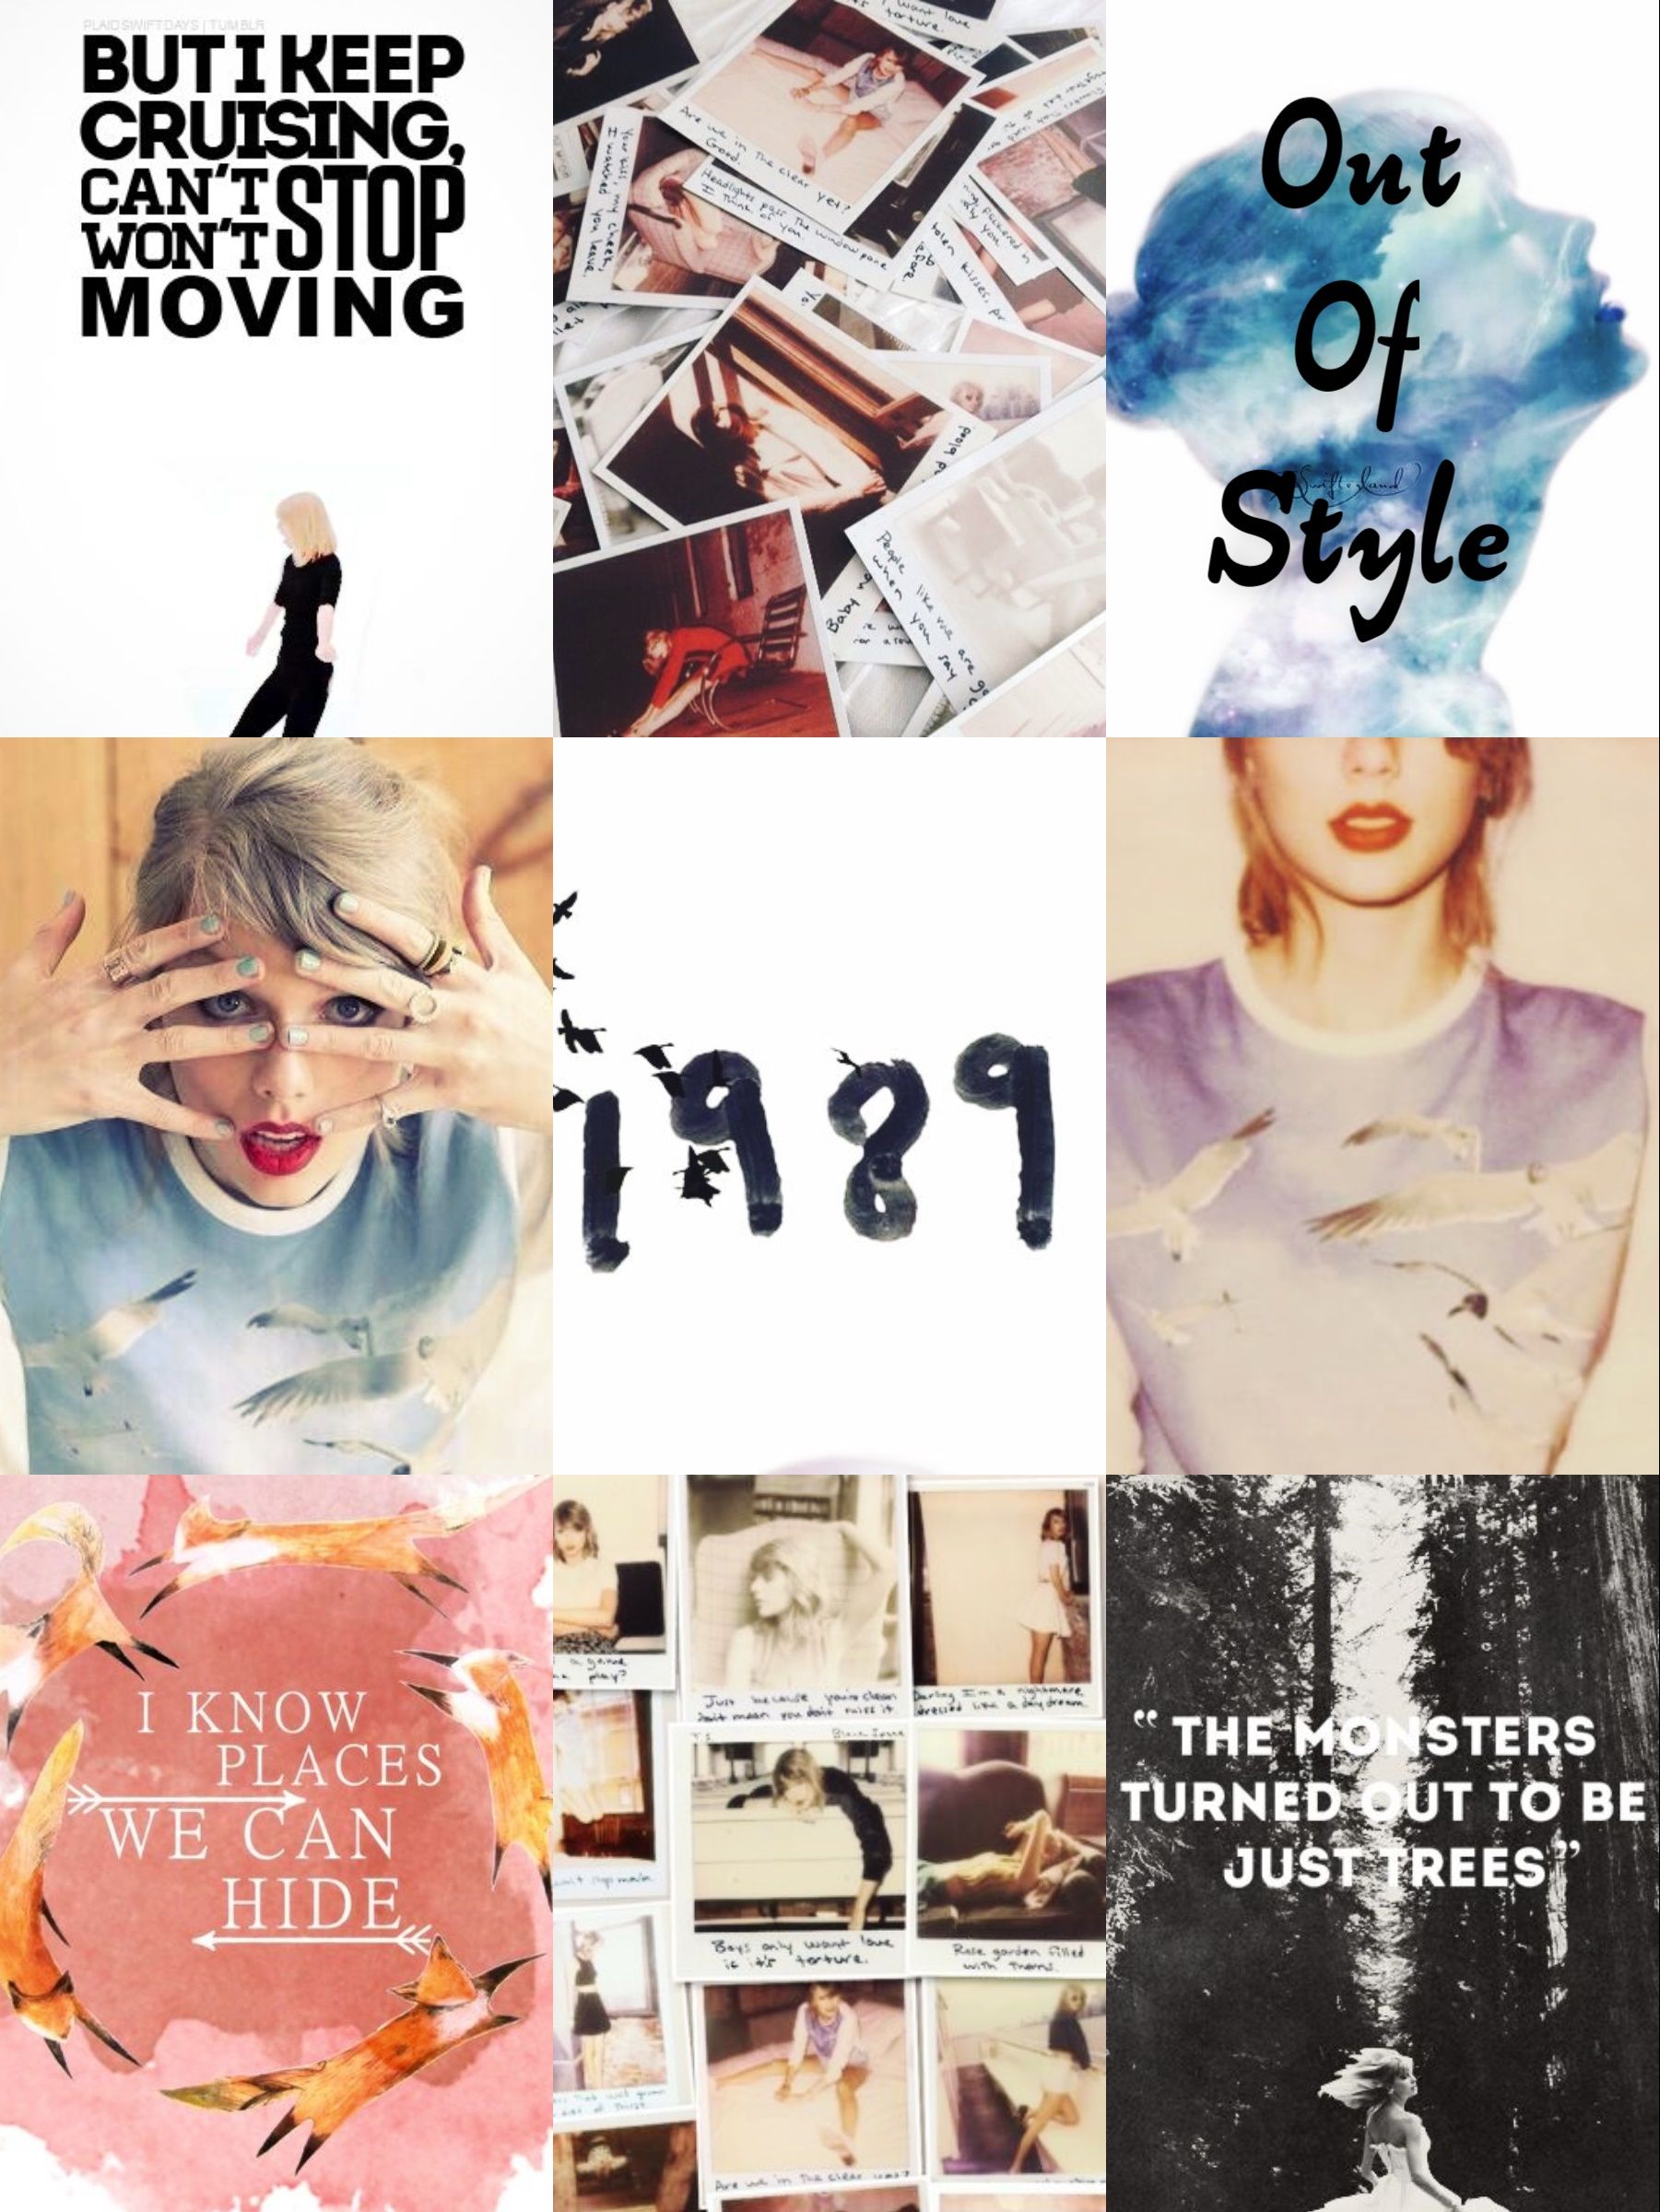 A collage of Taylor Swift's 1989 album cover and lyrics. - Taylor Swift